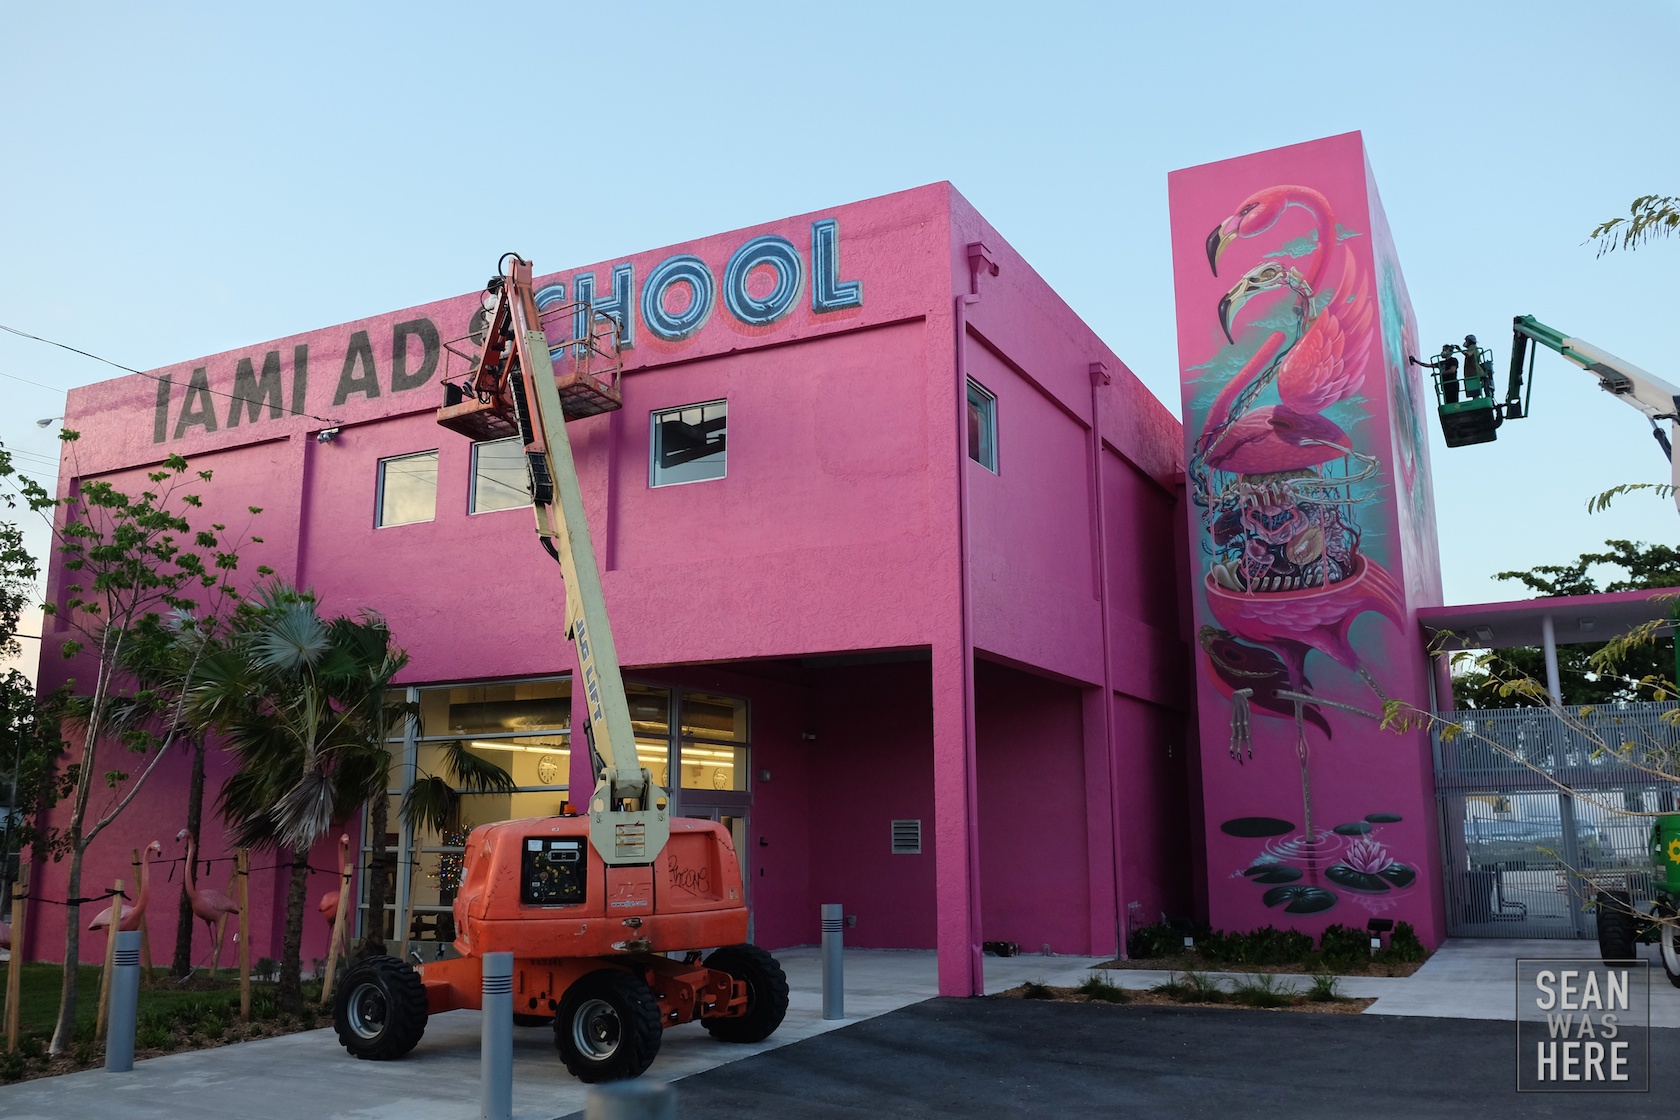 Five8 (left) and Nychos painting up the new Miami Ad School location in Wynwood (having moved from South Beach). Wynwood Miami